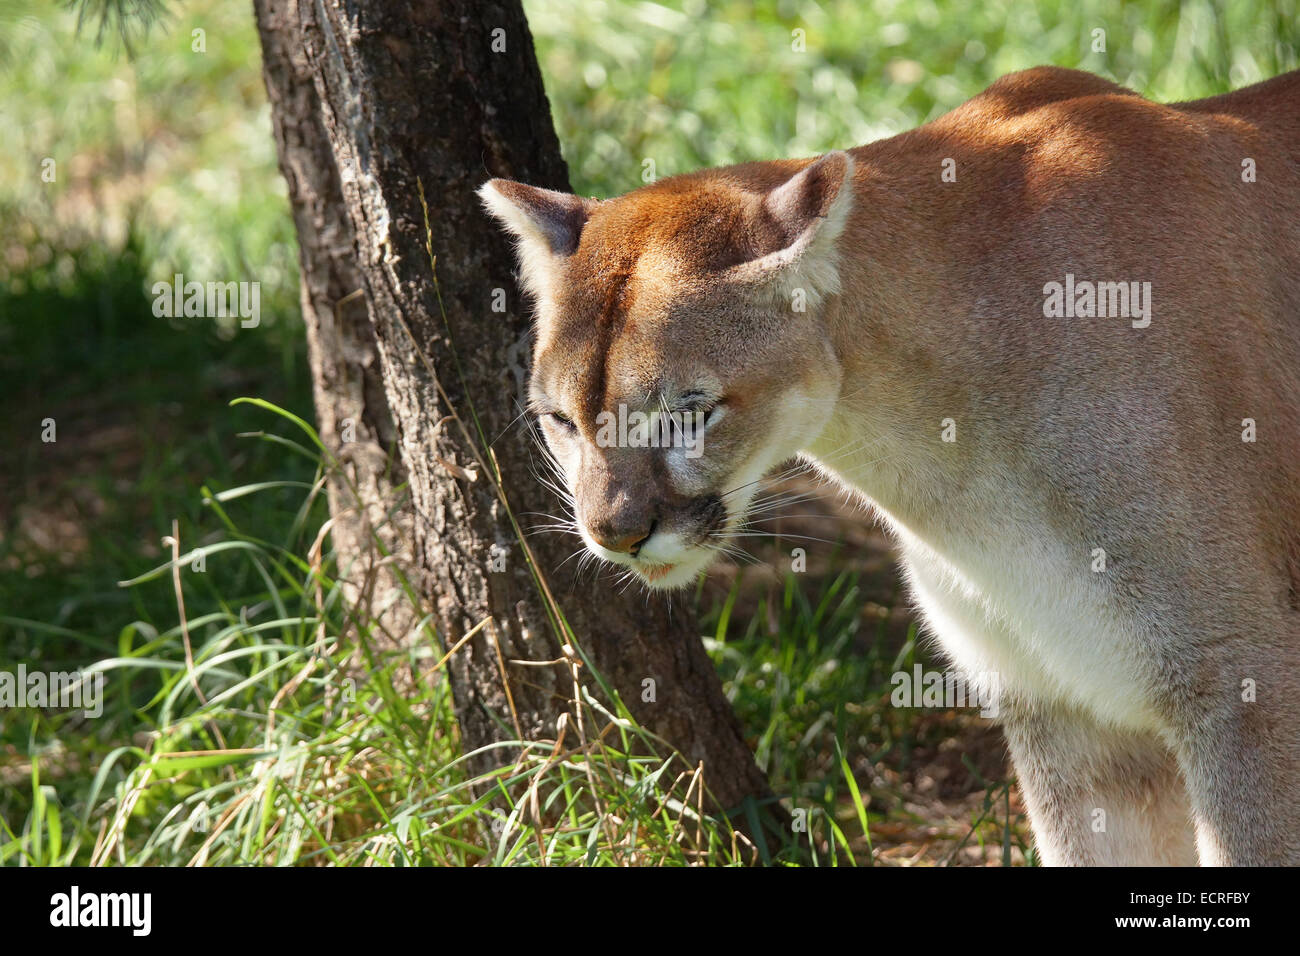 Wildcat or puma,Puma concolor, in shady natural Stock Photo - Alamy